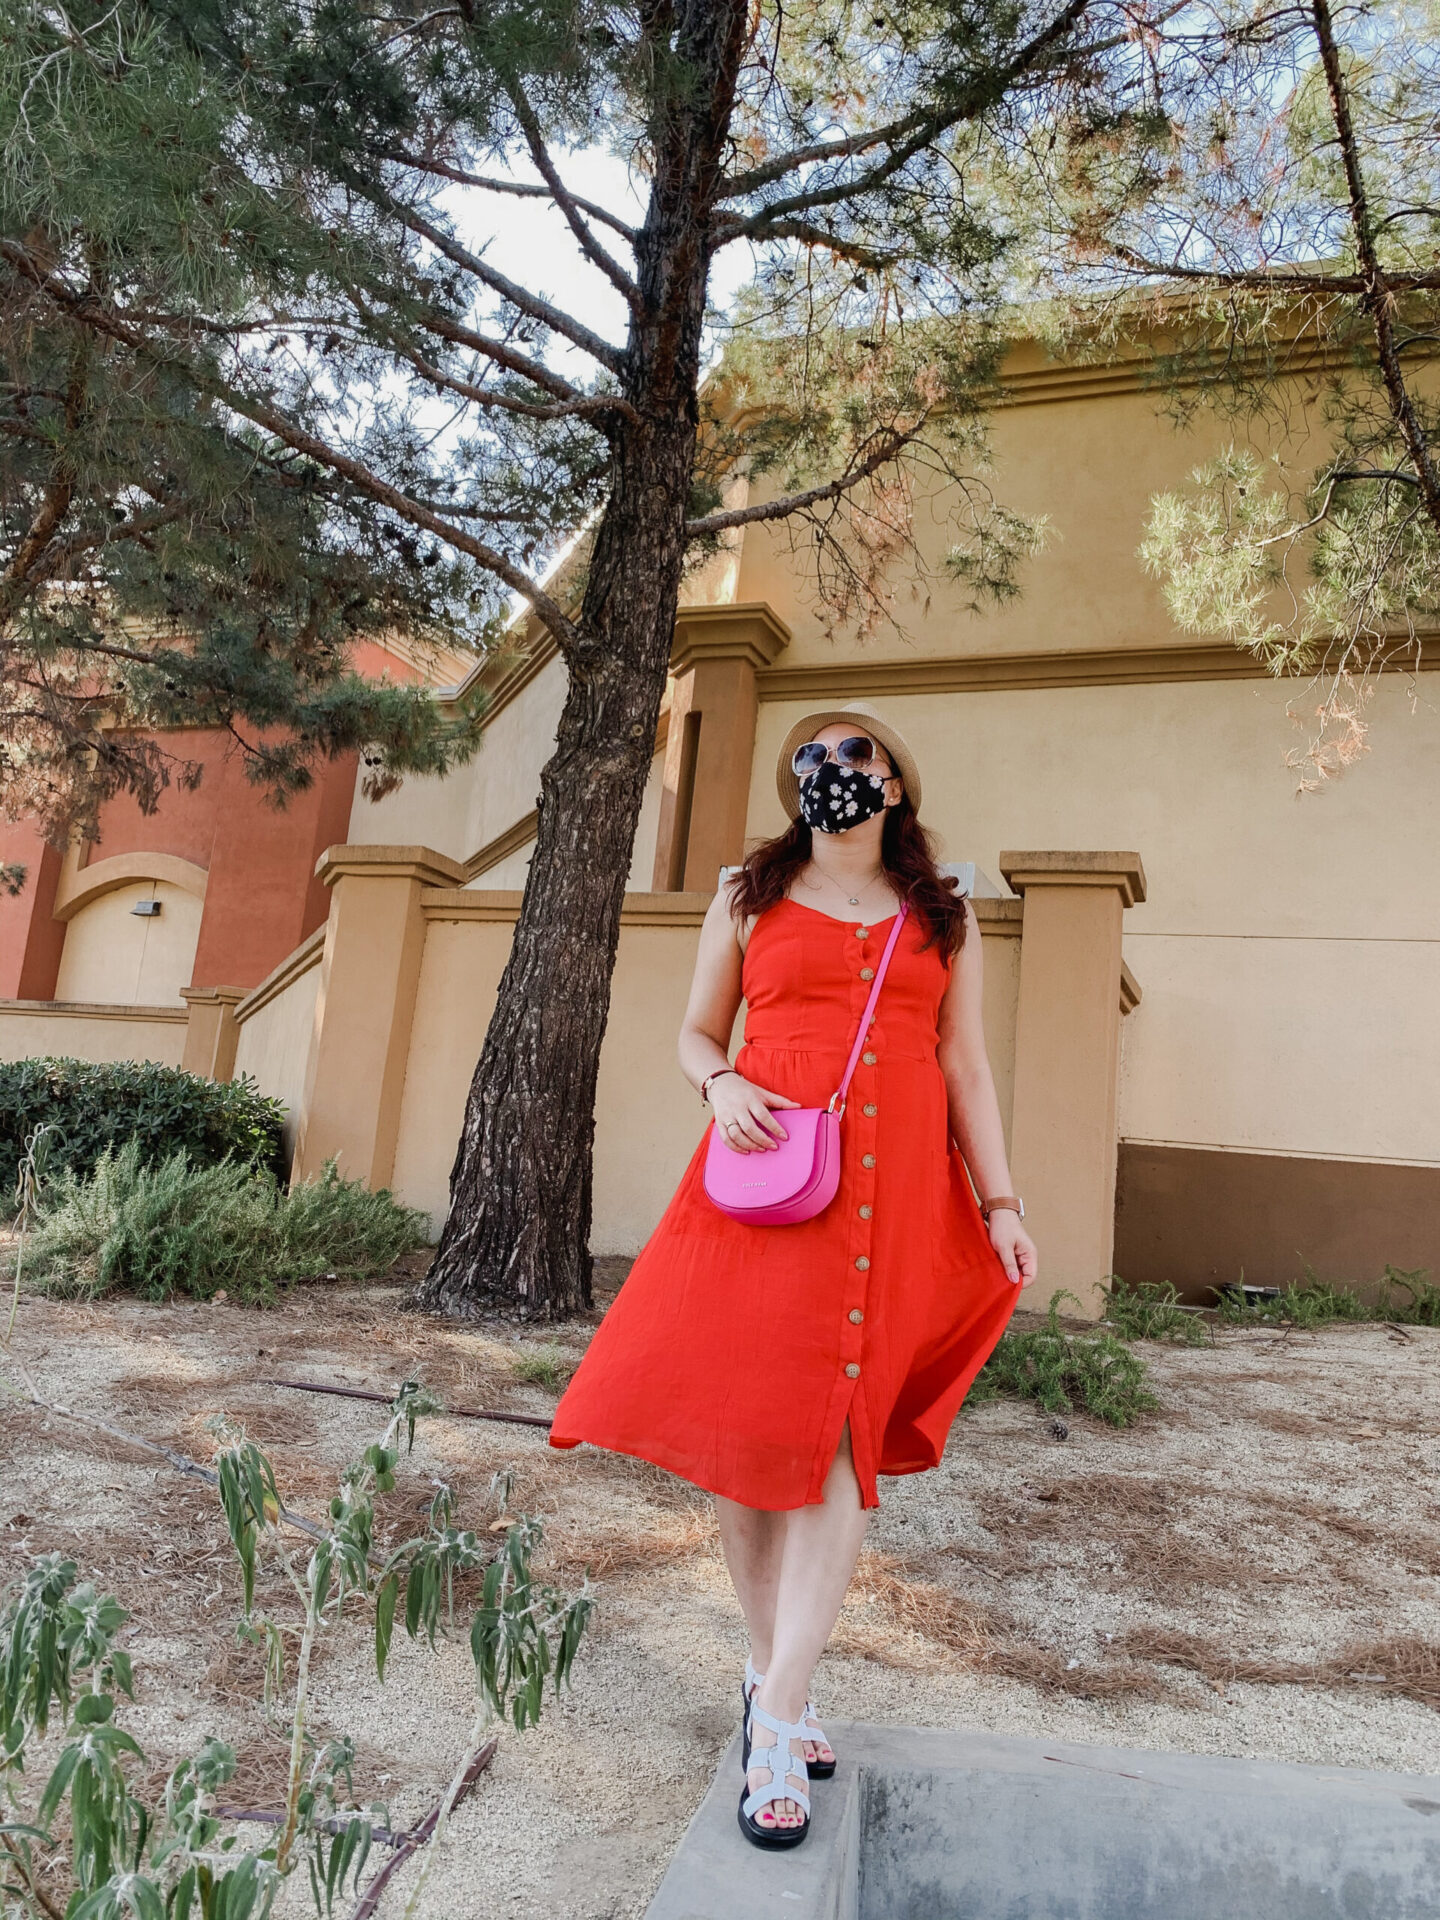 pslilyboutique-on-instagram-pinterest-amazon-red-dress-summer-2020-outfit-ideas-la-fashion-blogger-top-fashion-blog-lifestyle-blogger-IMG_2378, california, cole haan pink bag